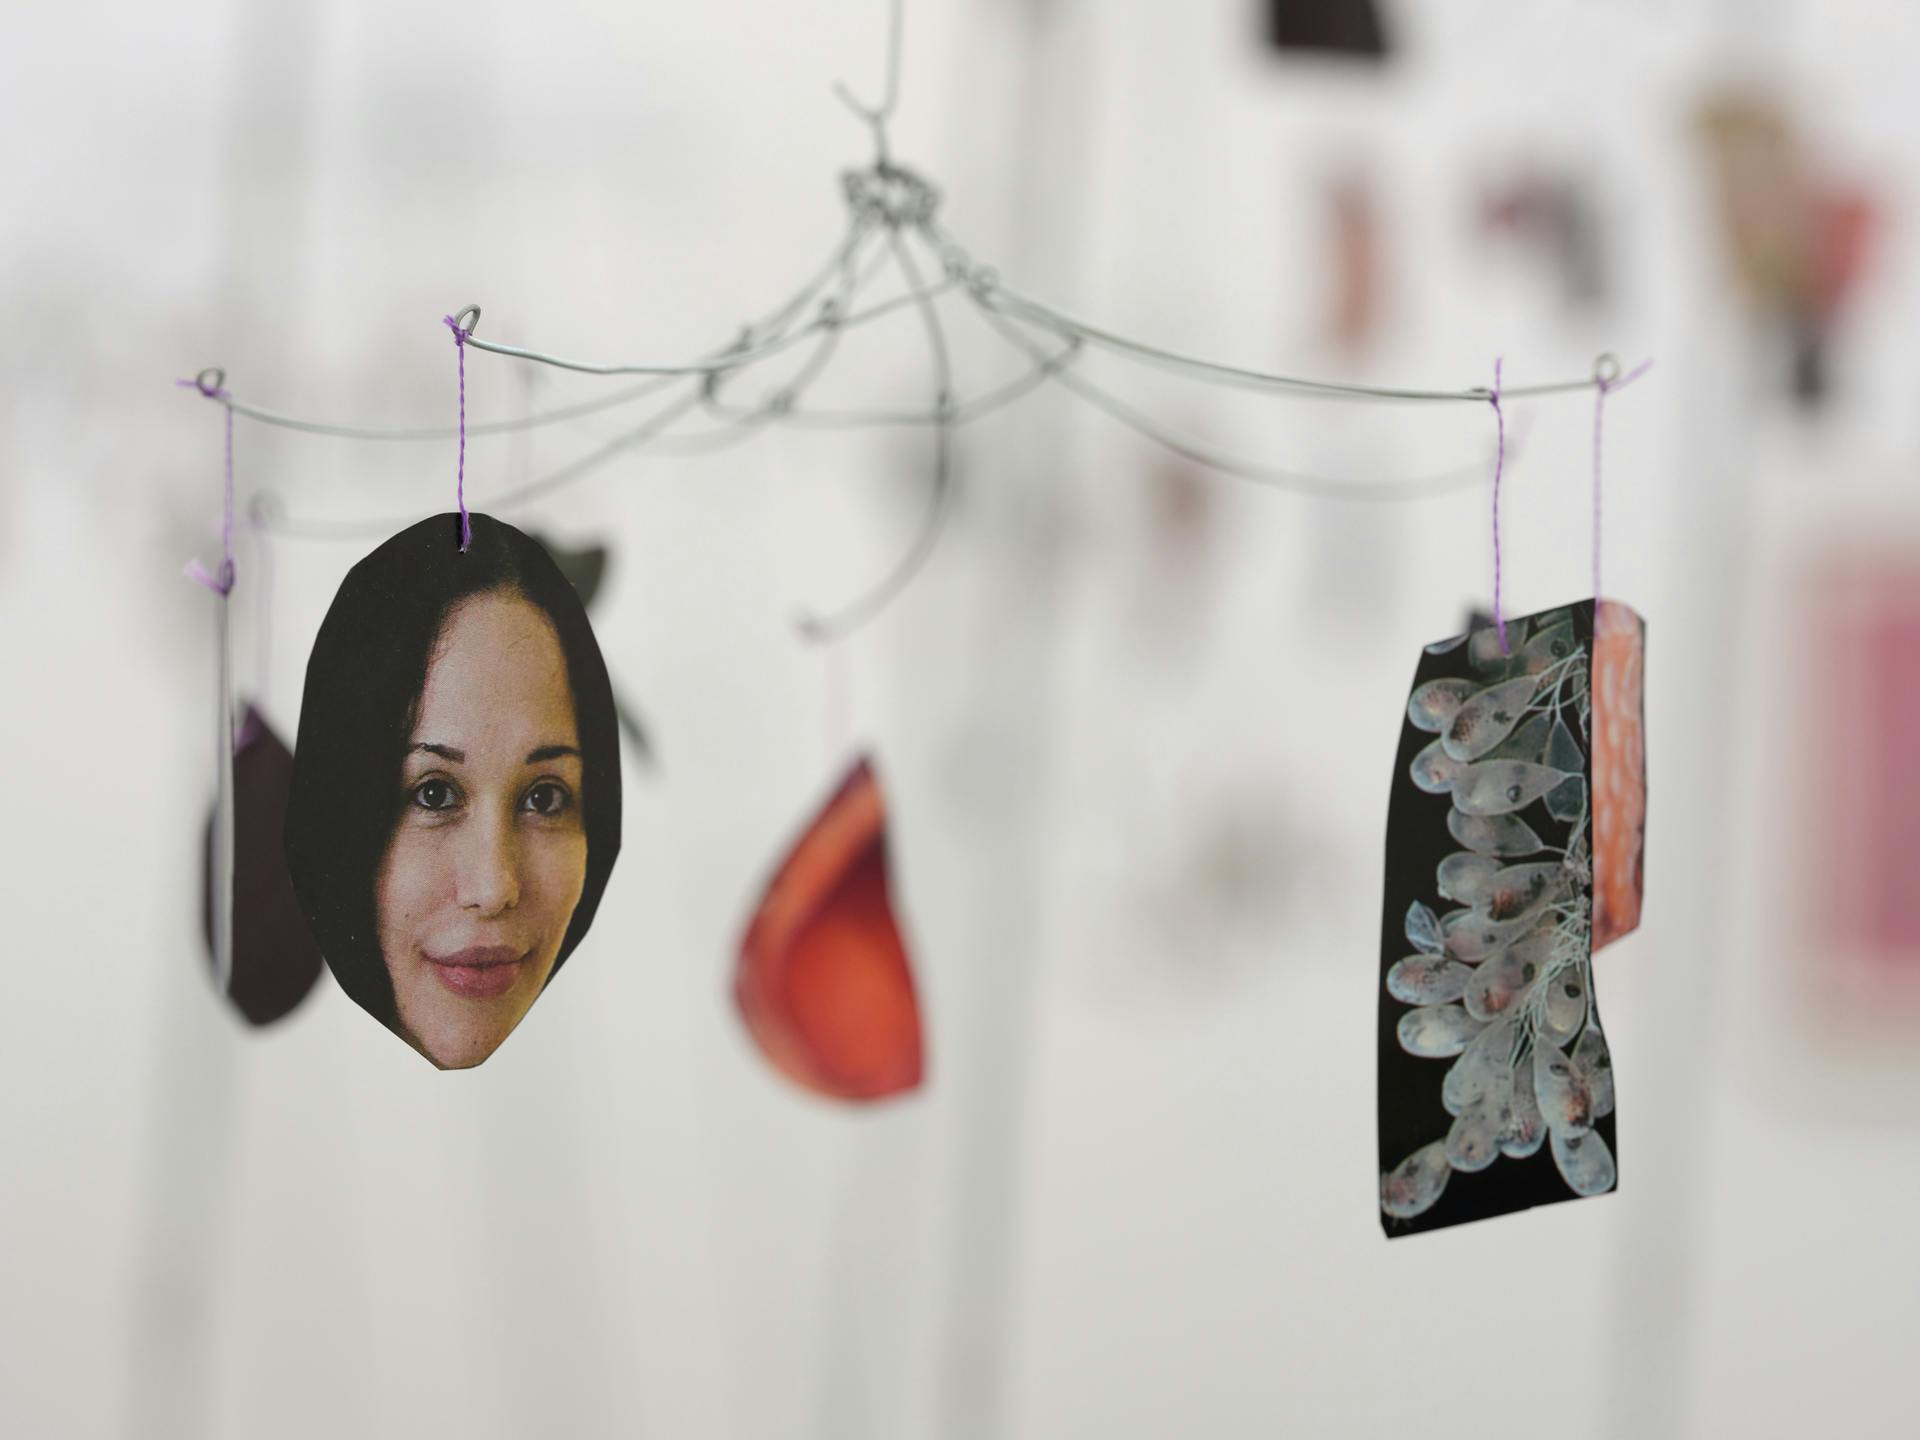 Paper cutouts hang from thin metal wires, most prominently a photo of a woman's face.